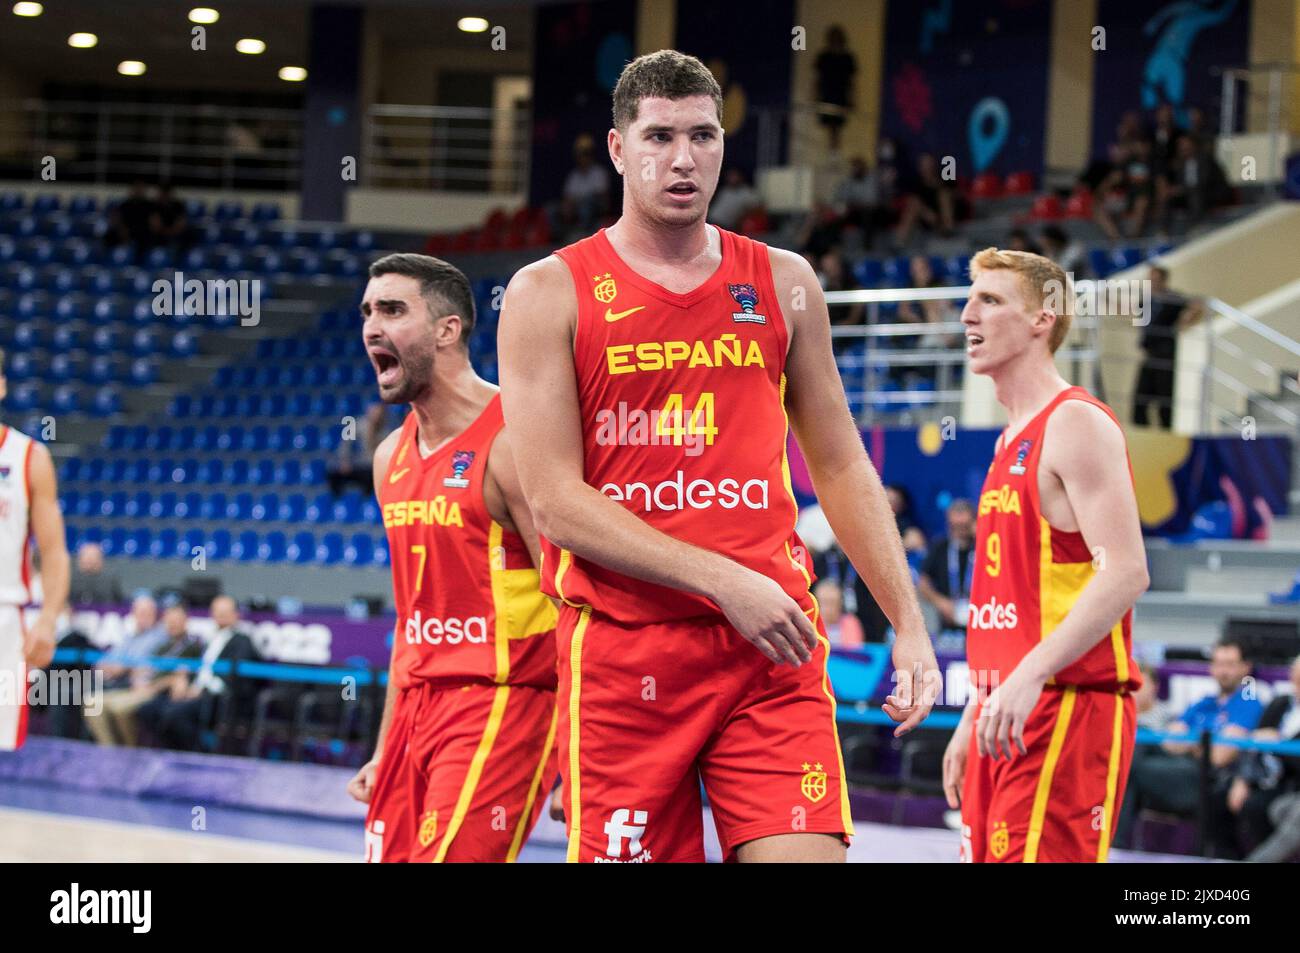 Tbilisi, Georgia, 6th September 2022. Joel Parra of Spain reacts during the FIBA EuroBasket 2022 group A match between Montenegro and Spain at Tbilisi Arena in Tbilisi, Georgia. September 6, 2022. Credit: Nikola Krstic/Alamy Stock Photo